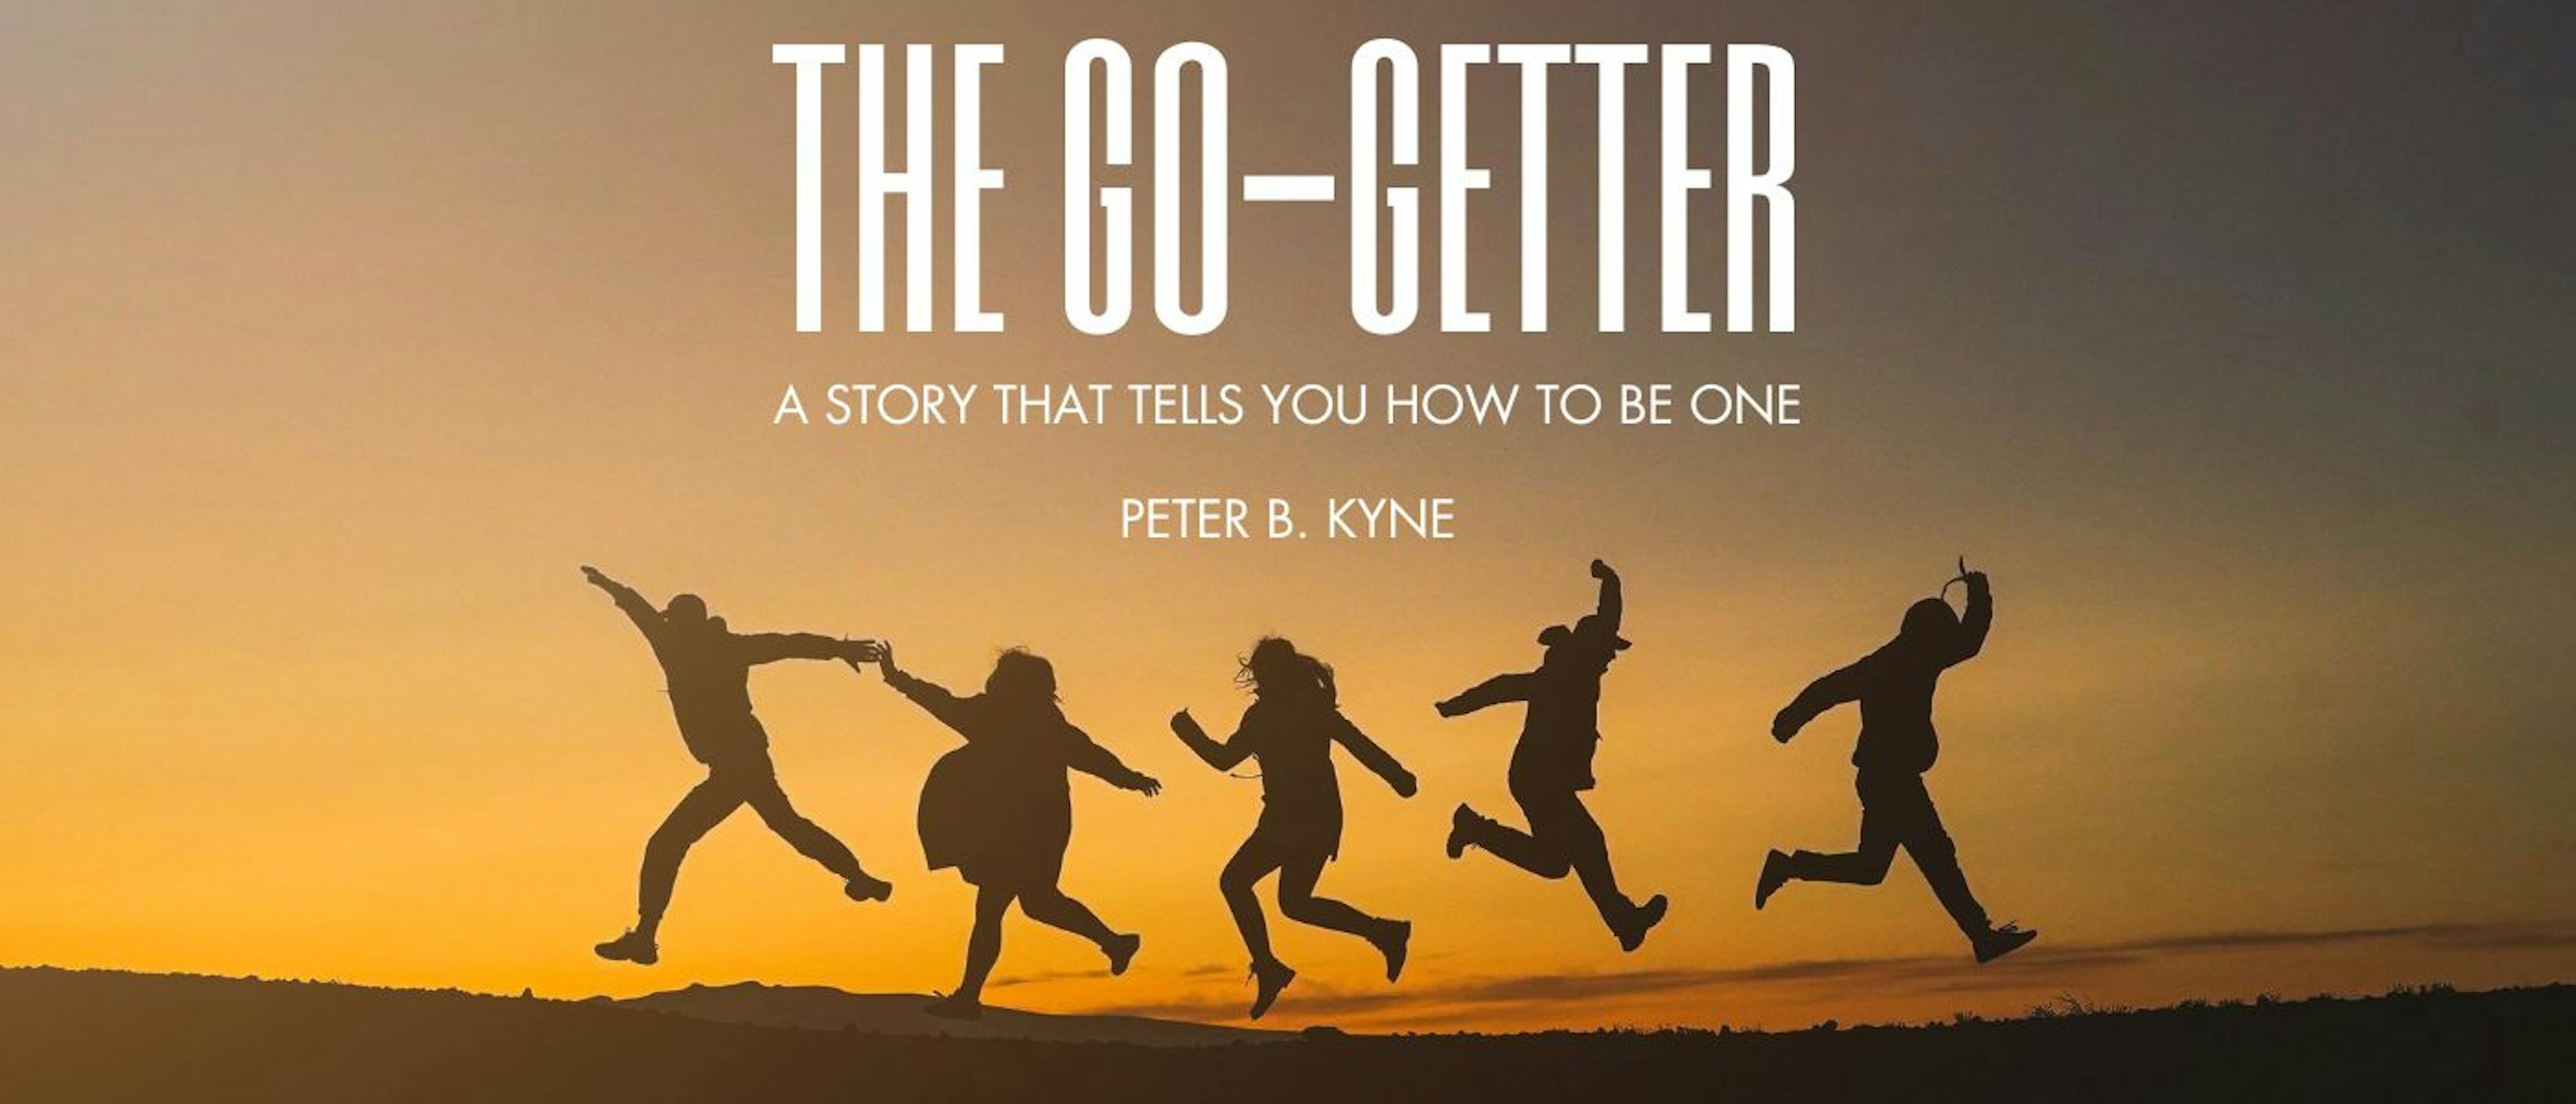 featured image - The Go-Getter: A Story That Tells You How to be One by Peter B. Kyne - Table of Links